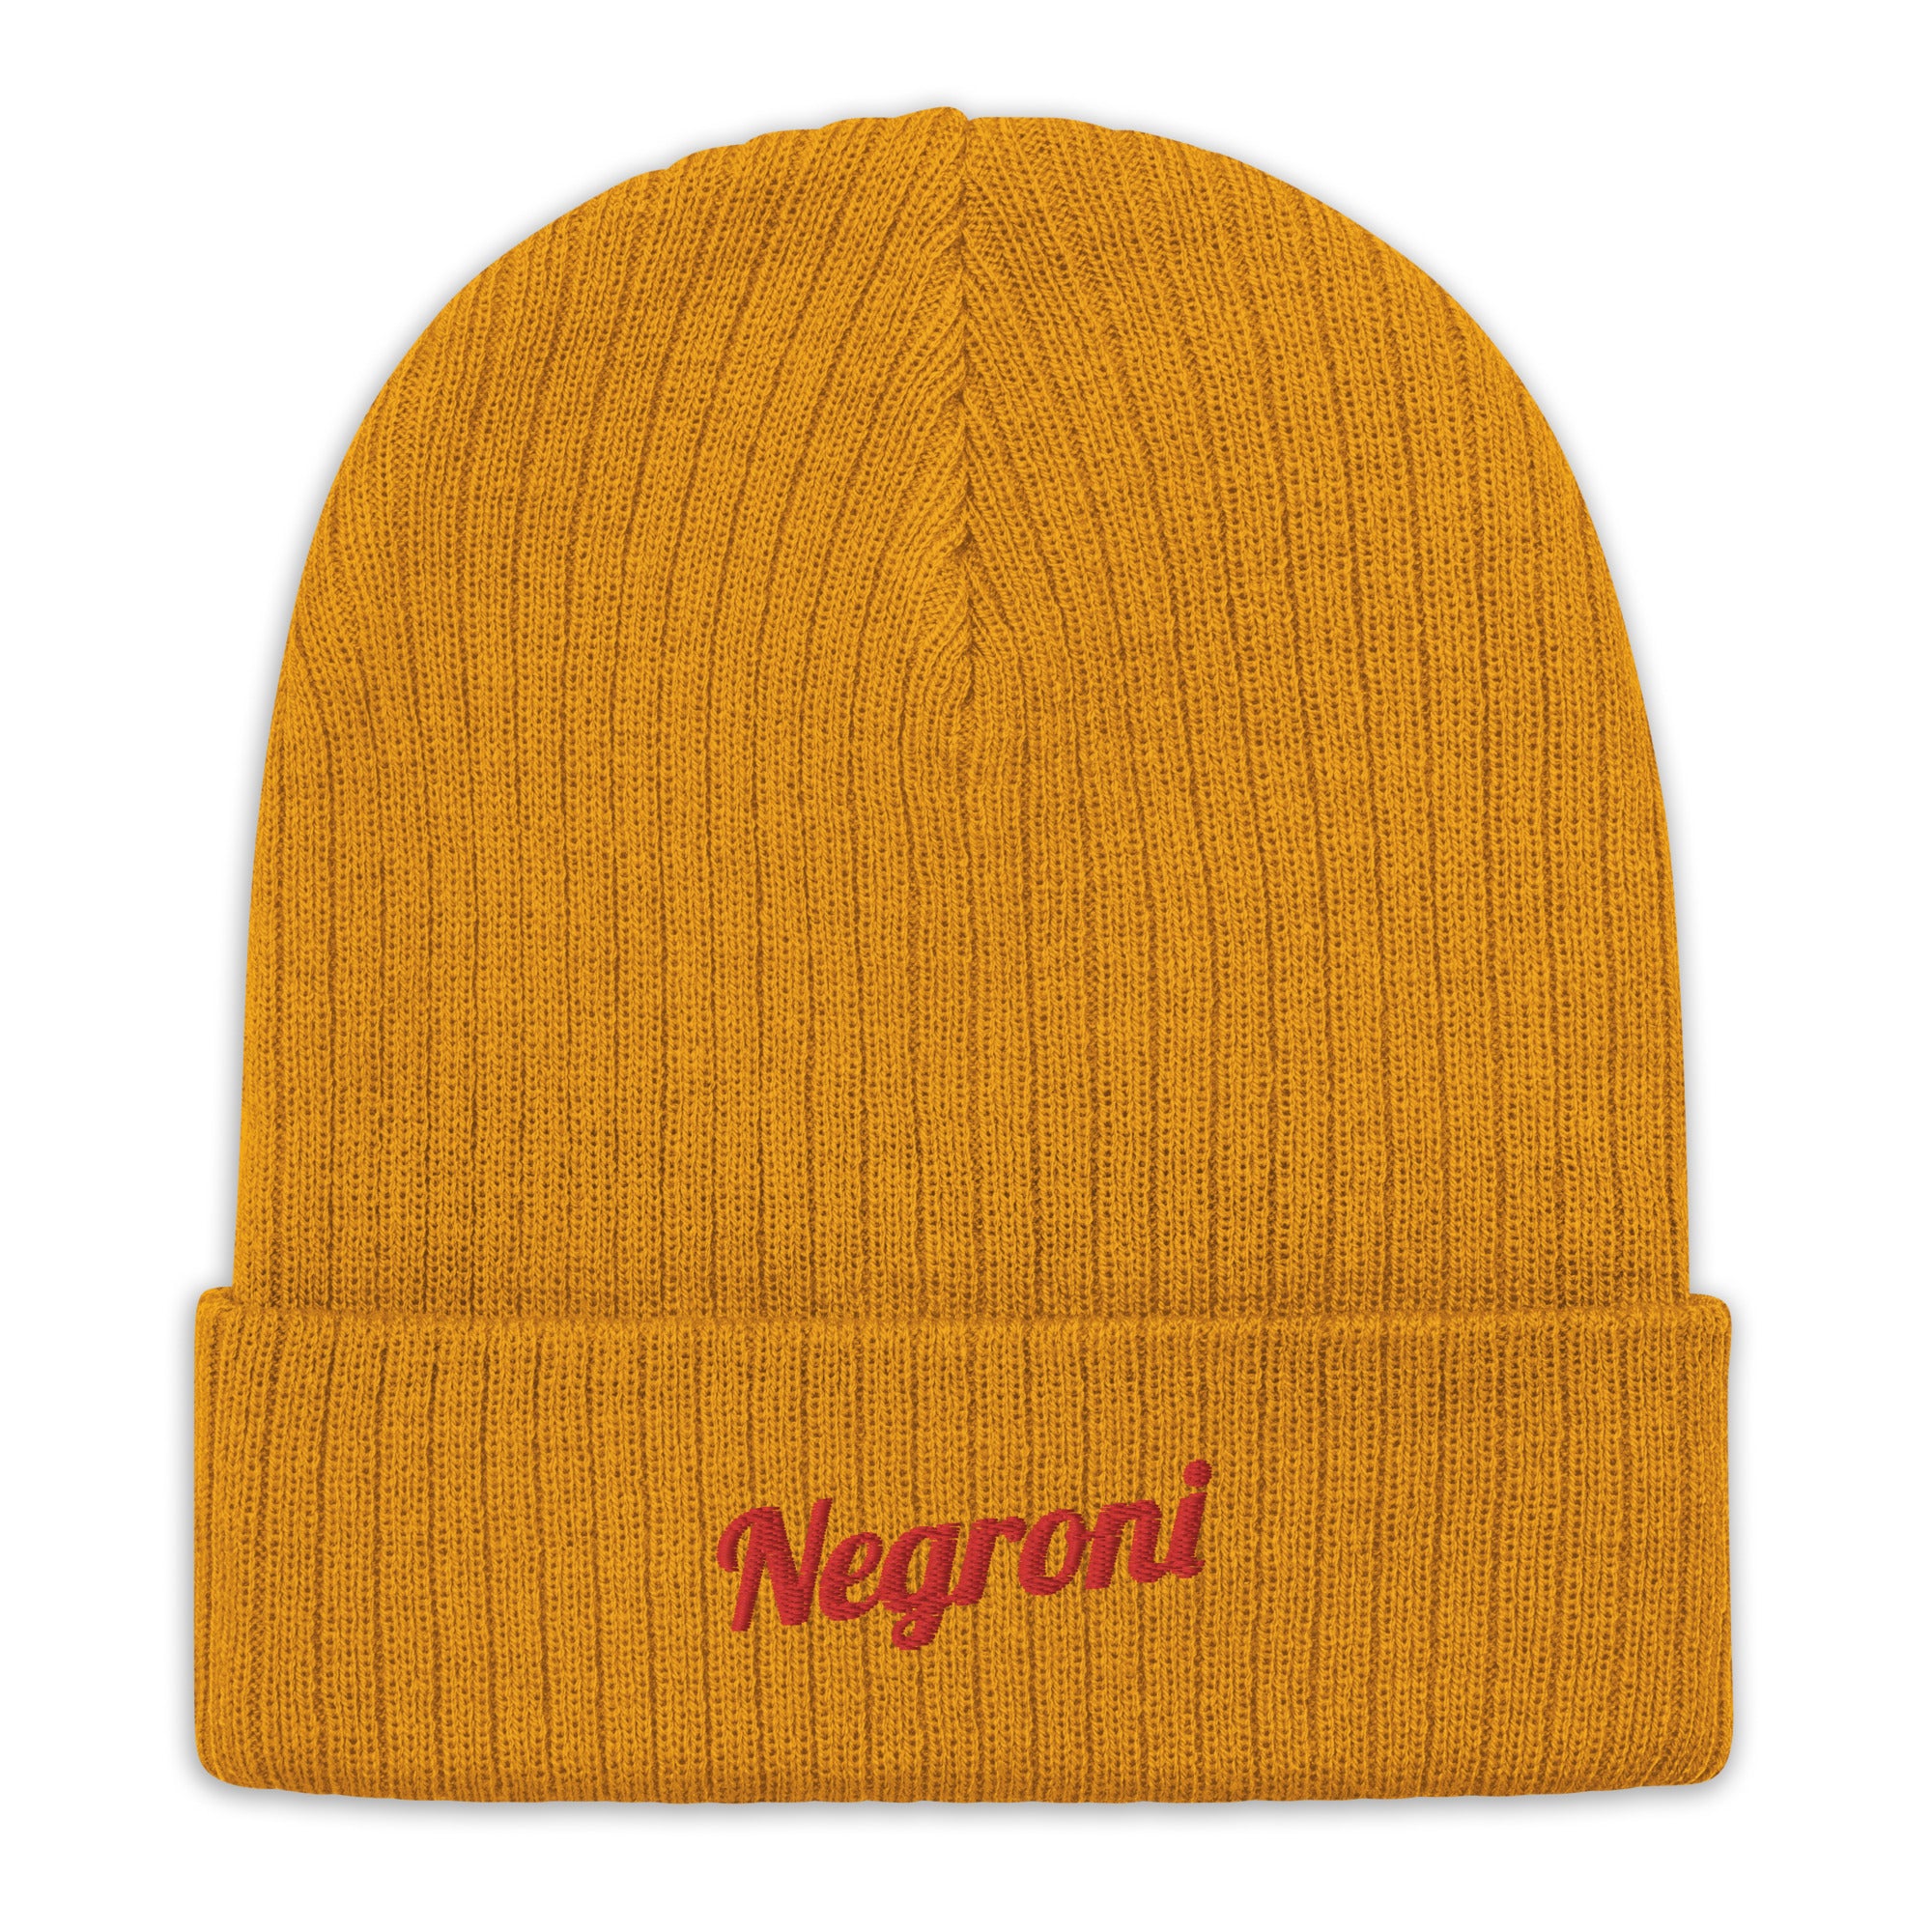 Negroni - Recycled Embroidered Beanie